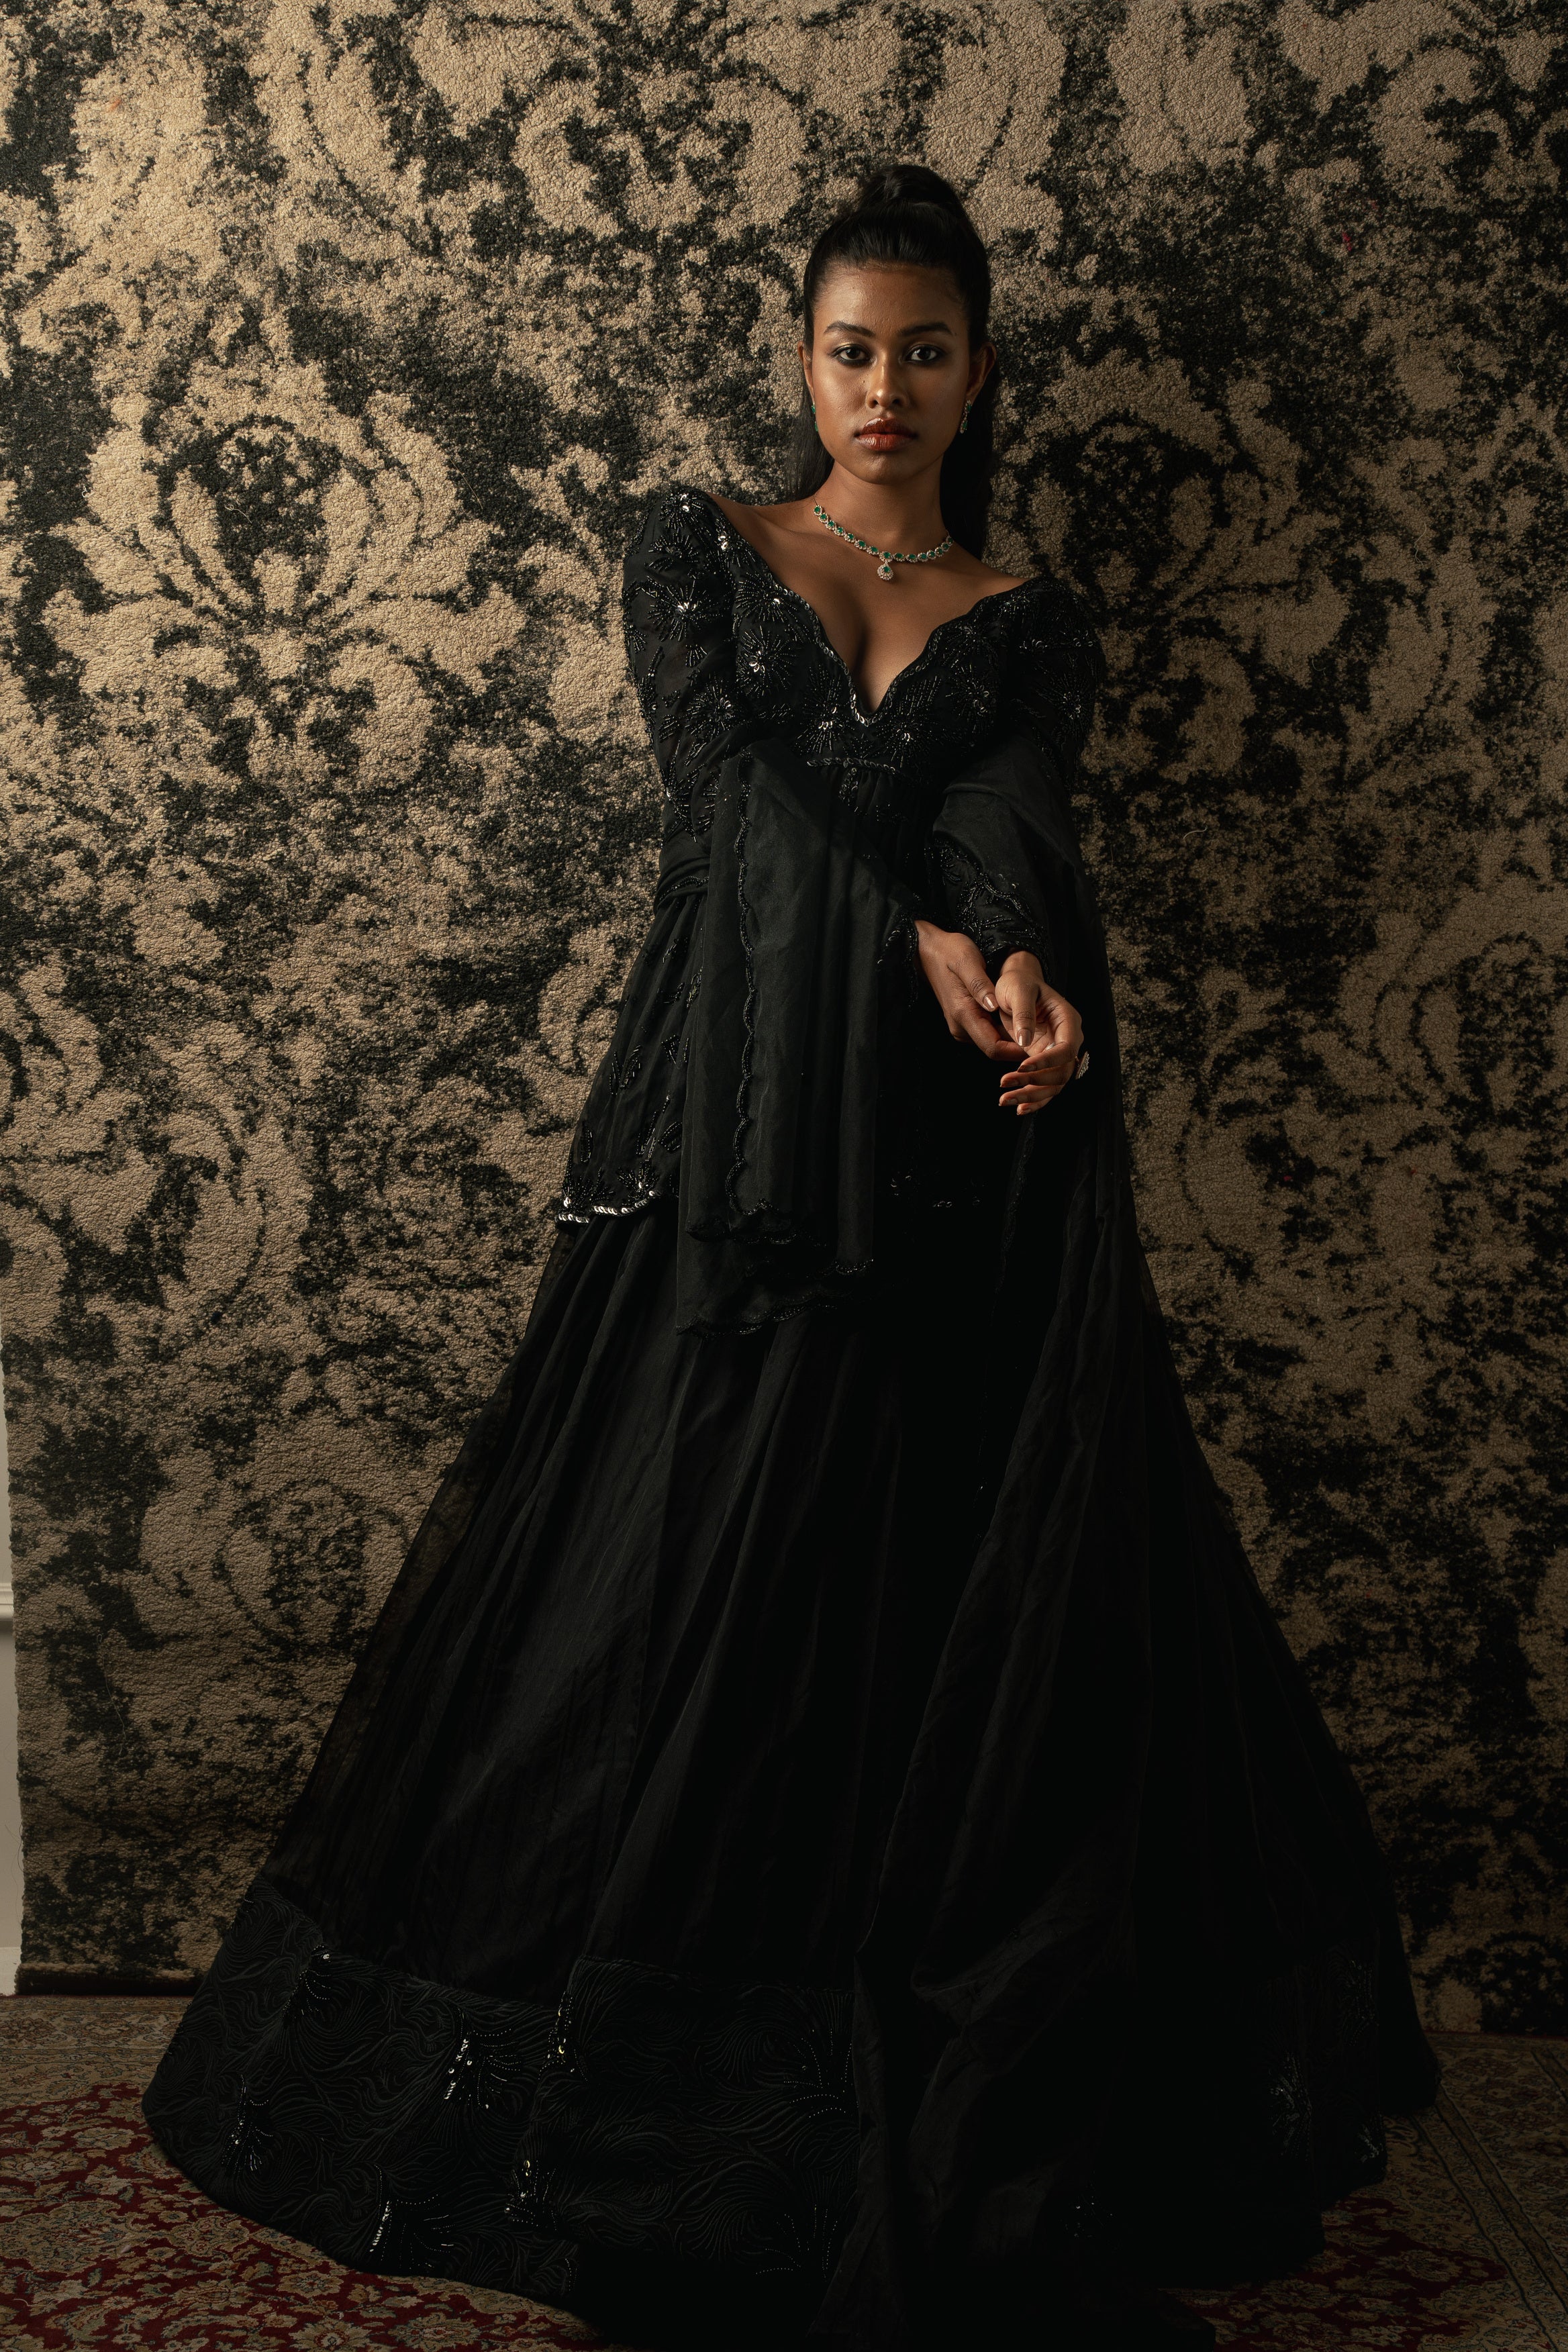 A symphony of black elegance: Organza Lehenga meets its match in a chic Peplum Kurta, exuding sophistication with every step.